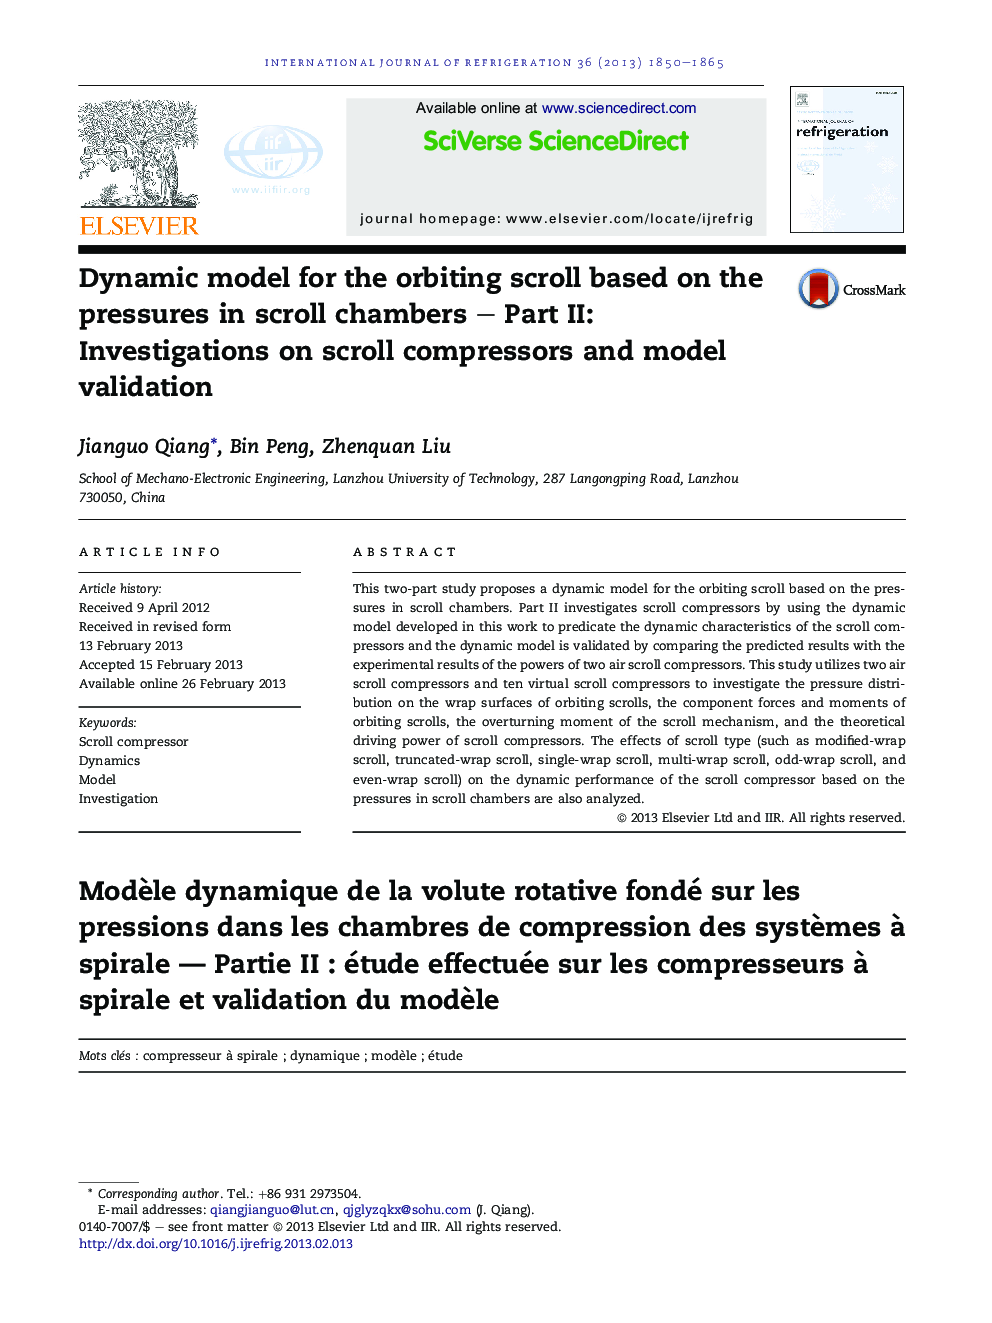 Dynamic model for the orbiting scroll based on the pressures in scroll chambers – Part II: Investigations on scroll compressors and model validation